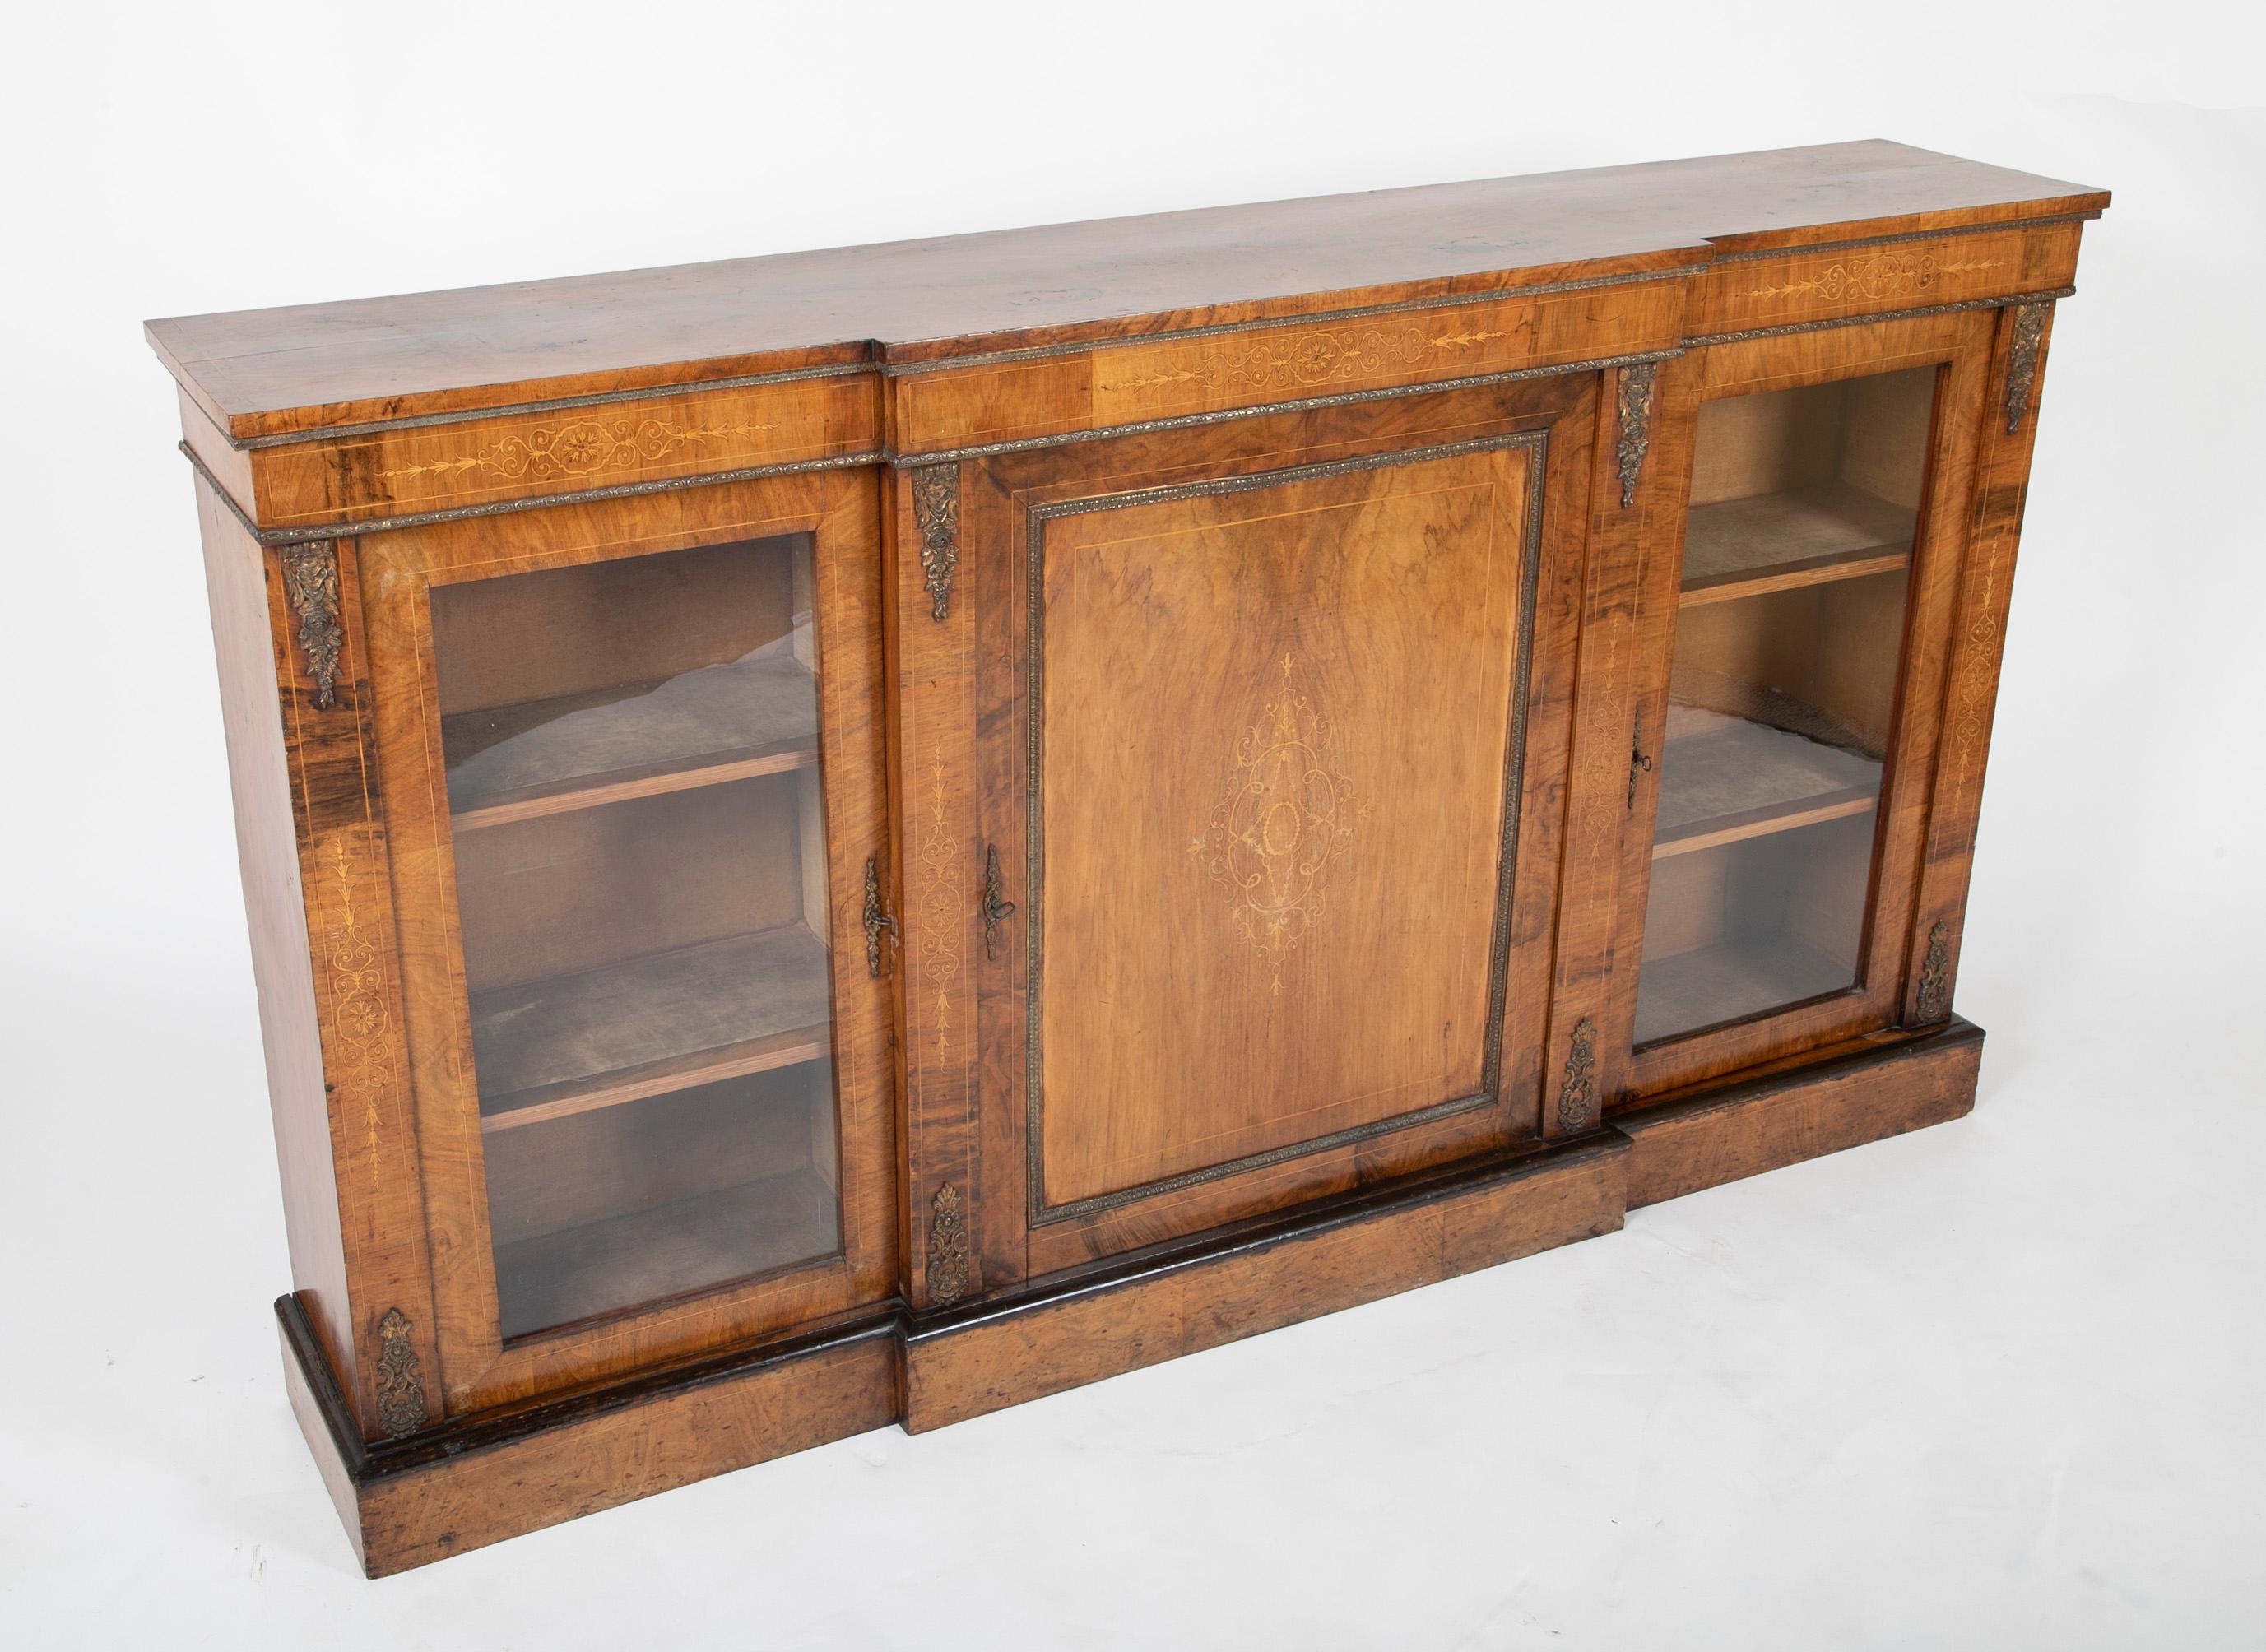 Handsome 19th century English credenza with beautiful figured rosewood veneer and fruit wood inlaid designs. With bronze moldings and mounts. Two glass fronted doors flank a large central door with delicate inlaid decoration. This piece has a very